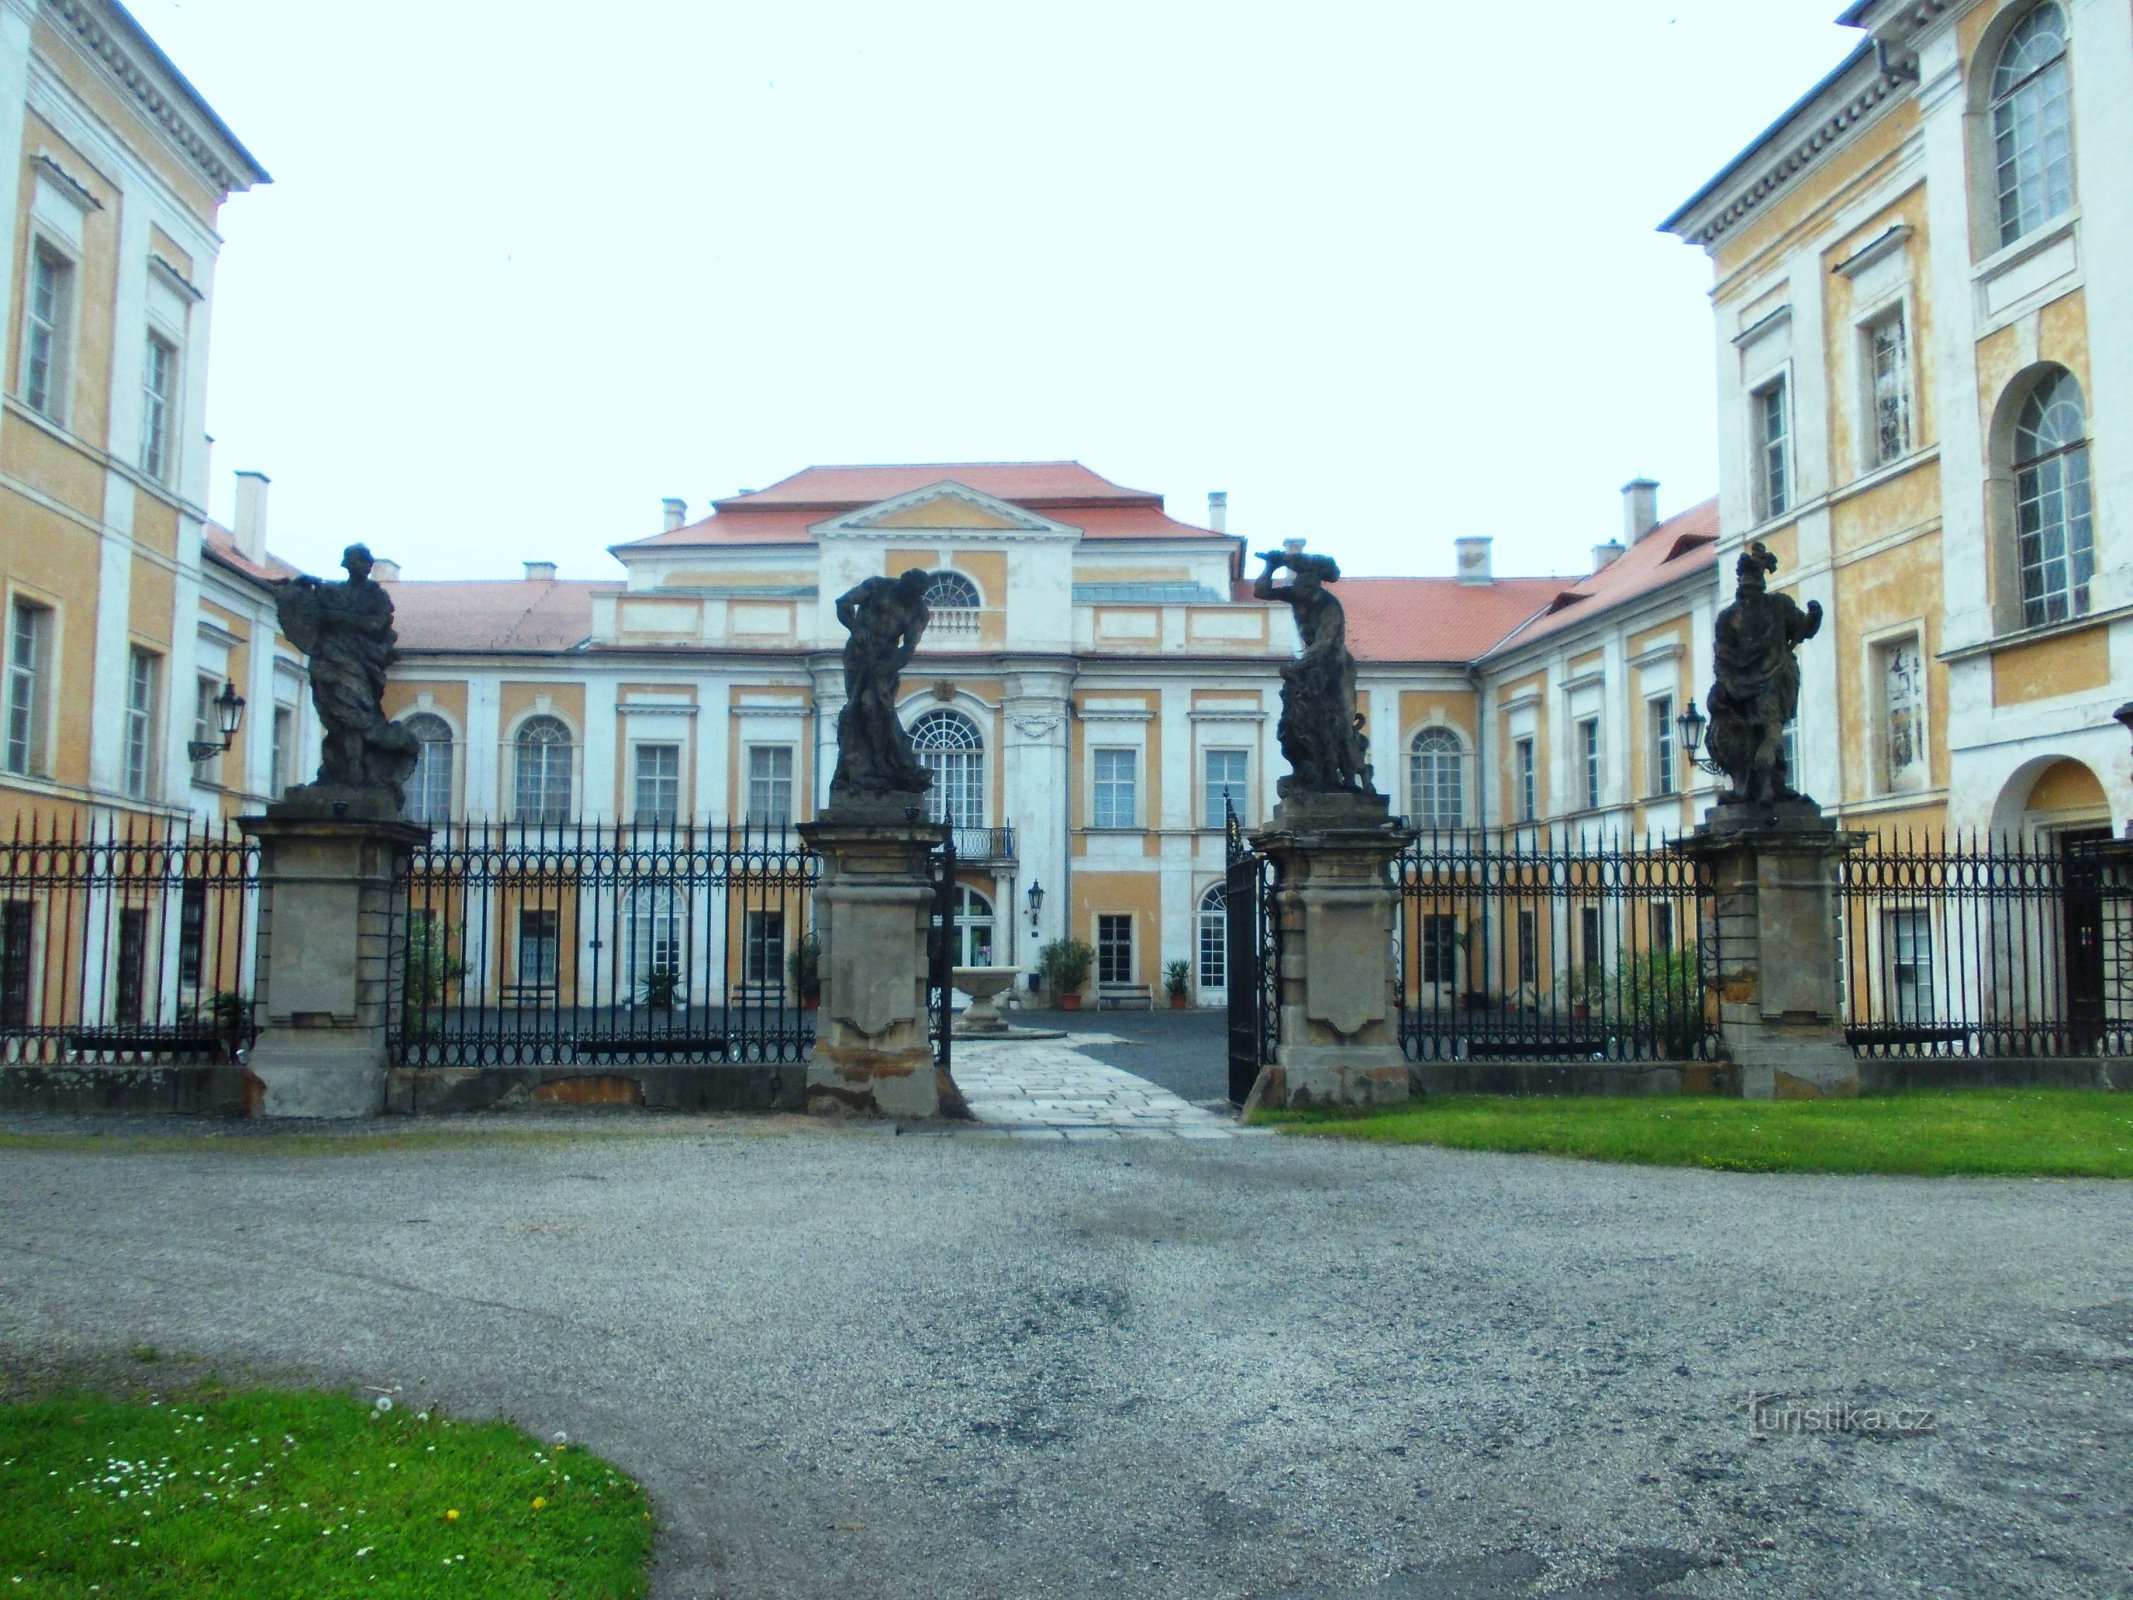 entrance to the castle with 4 statues of Minerva, Mars and twice Hercules by Master Braun